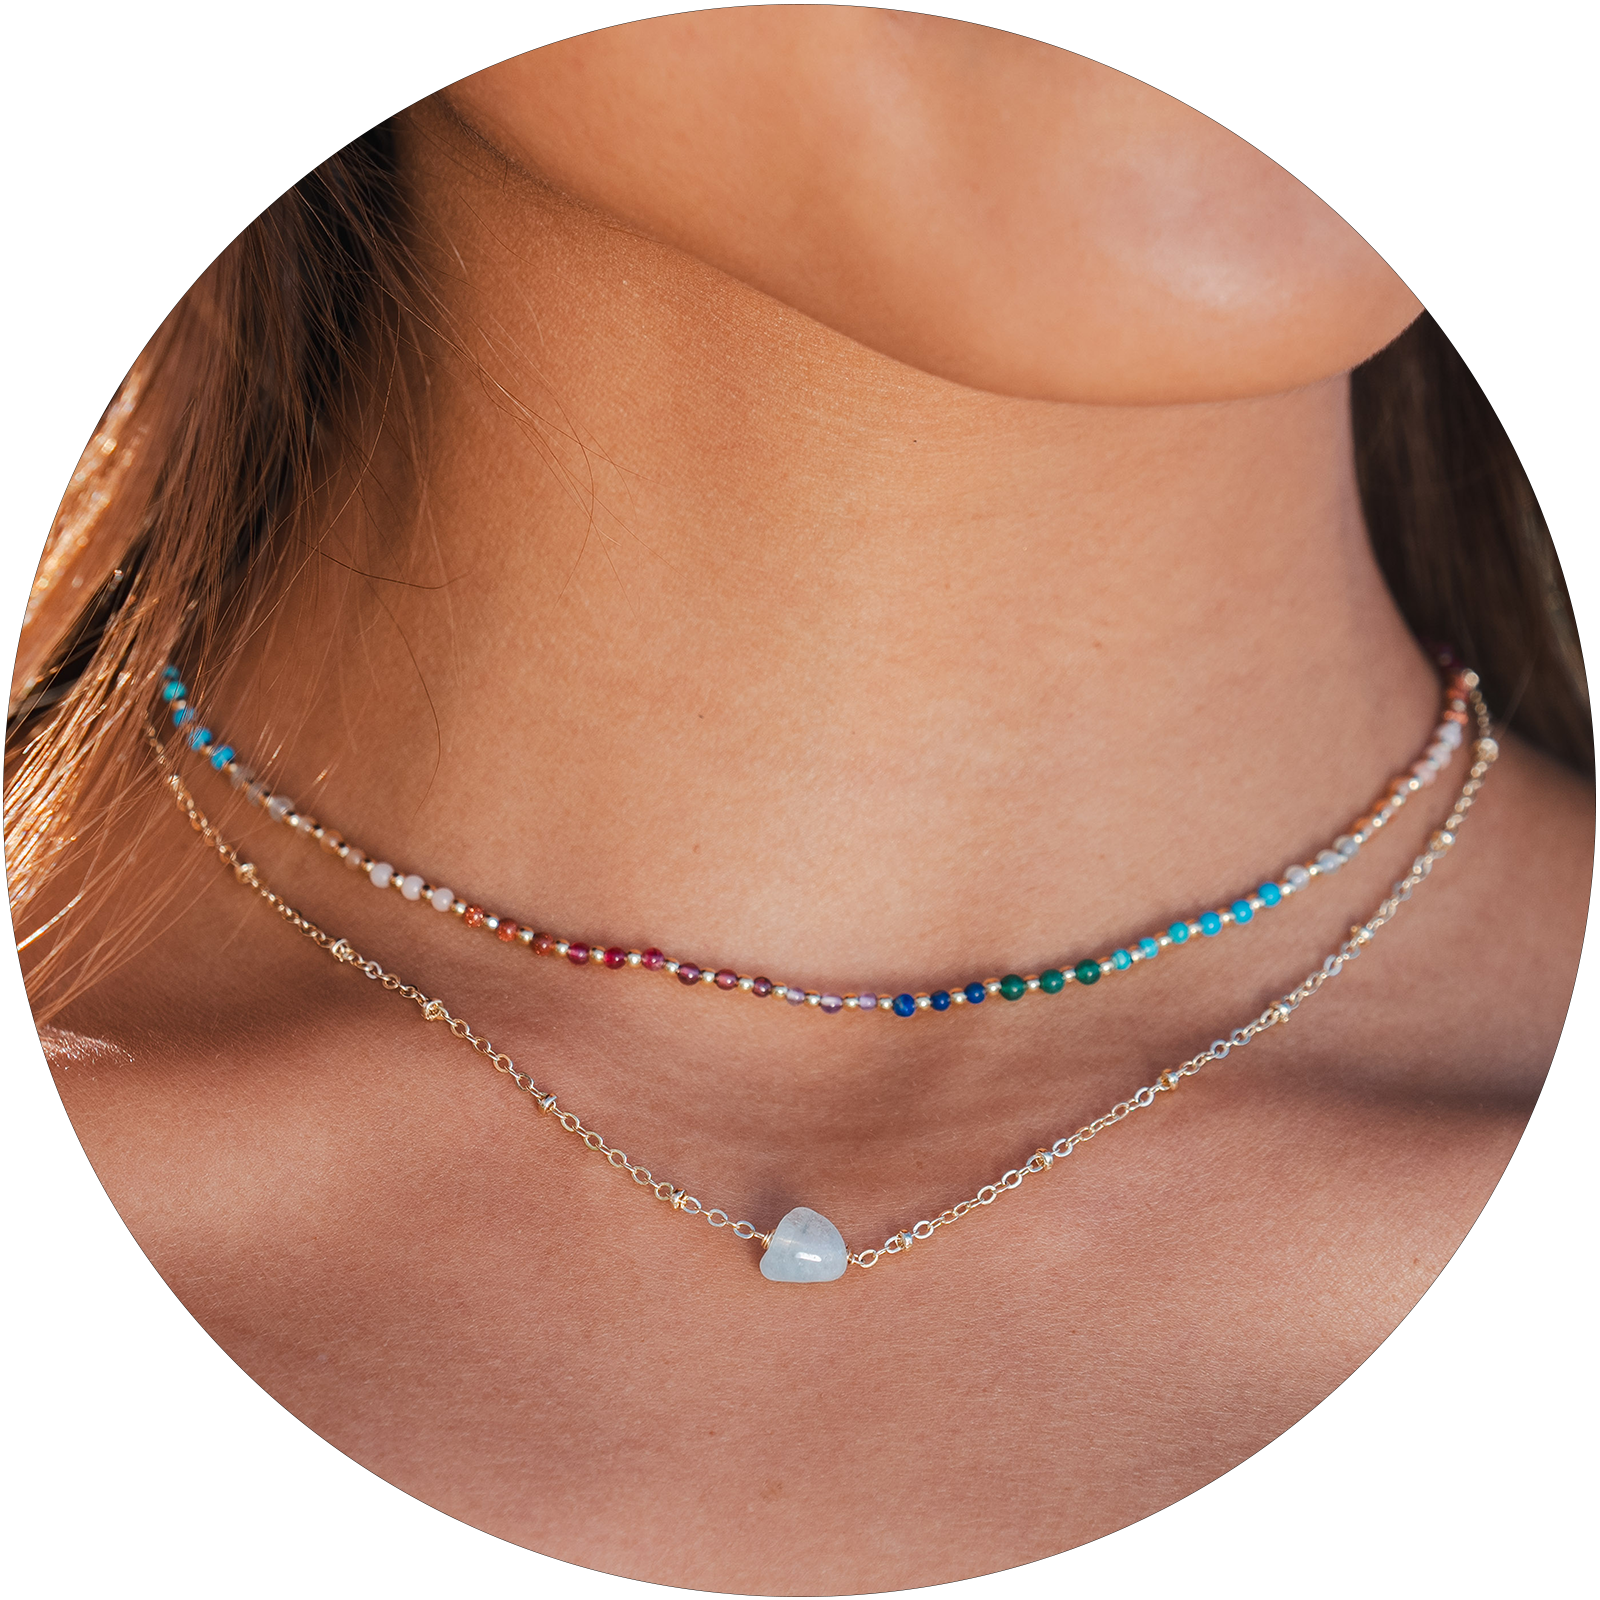 Model wearing a healing necklace stack. The necklace include a 2mm multicolor stone and gold bead healing necklace and an aquamarine stone and gold chain necklace